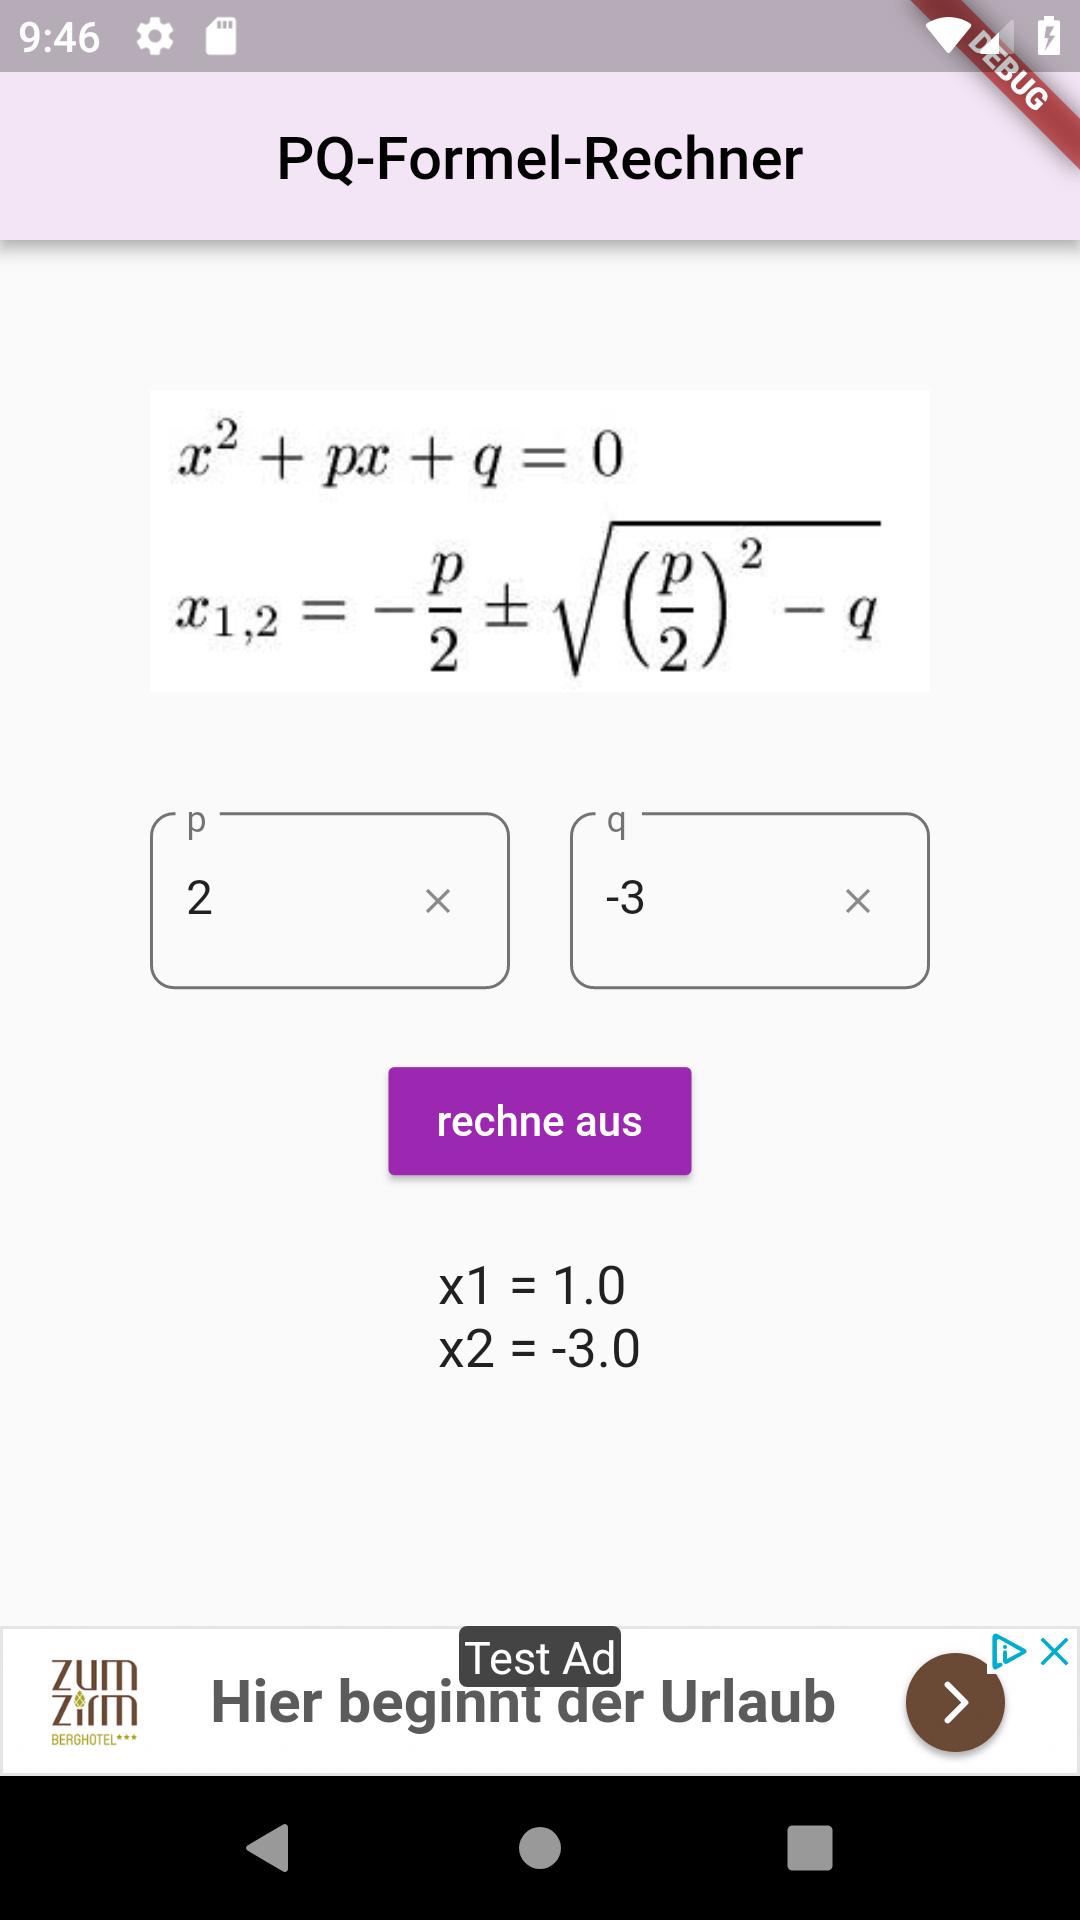 PQ-Formel-Rechner for Android - APK Download